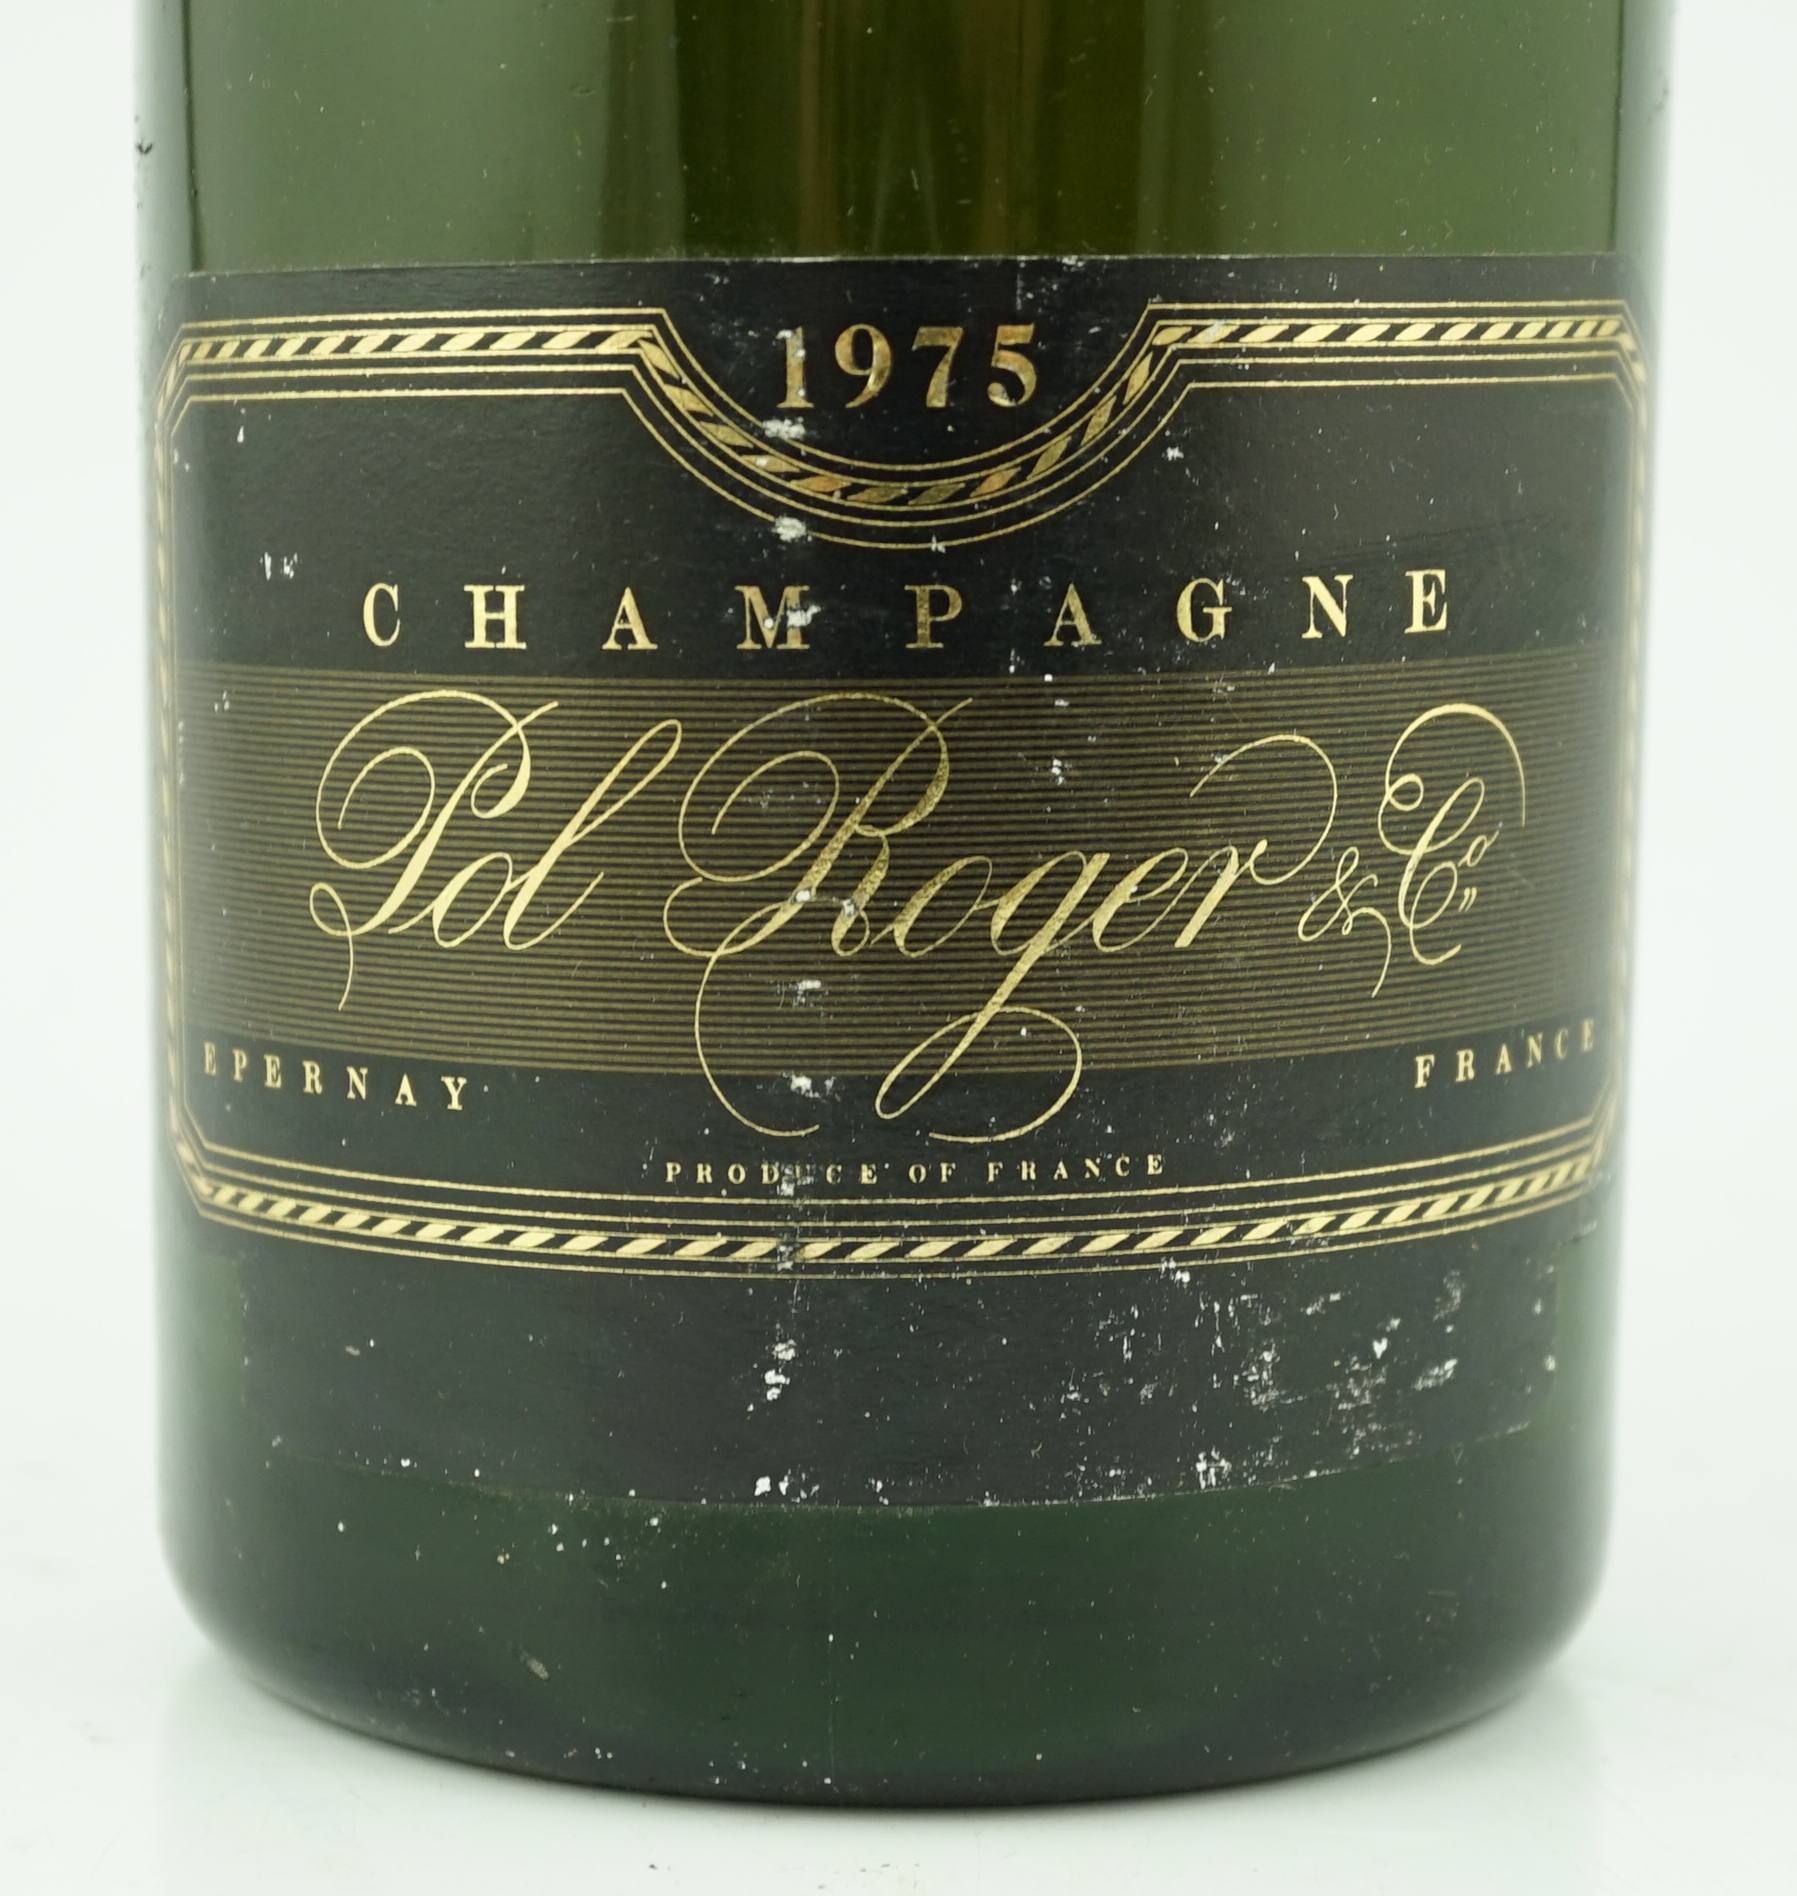 A magnum of champagne Pol Roger Cuvée Sir Winston Churchill 1975